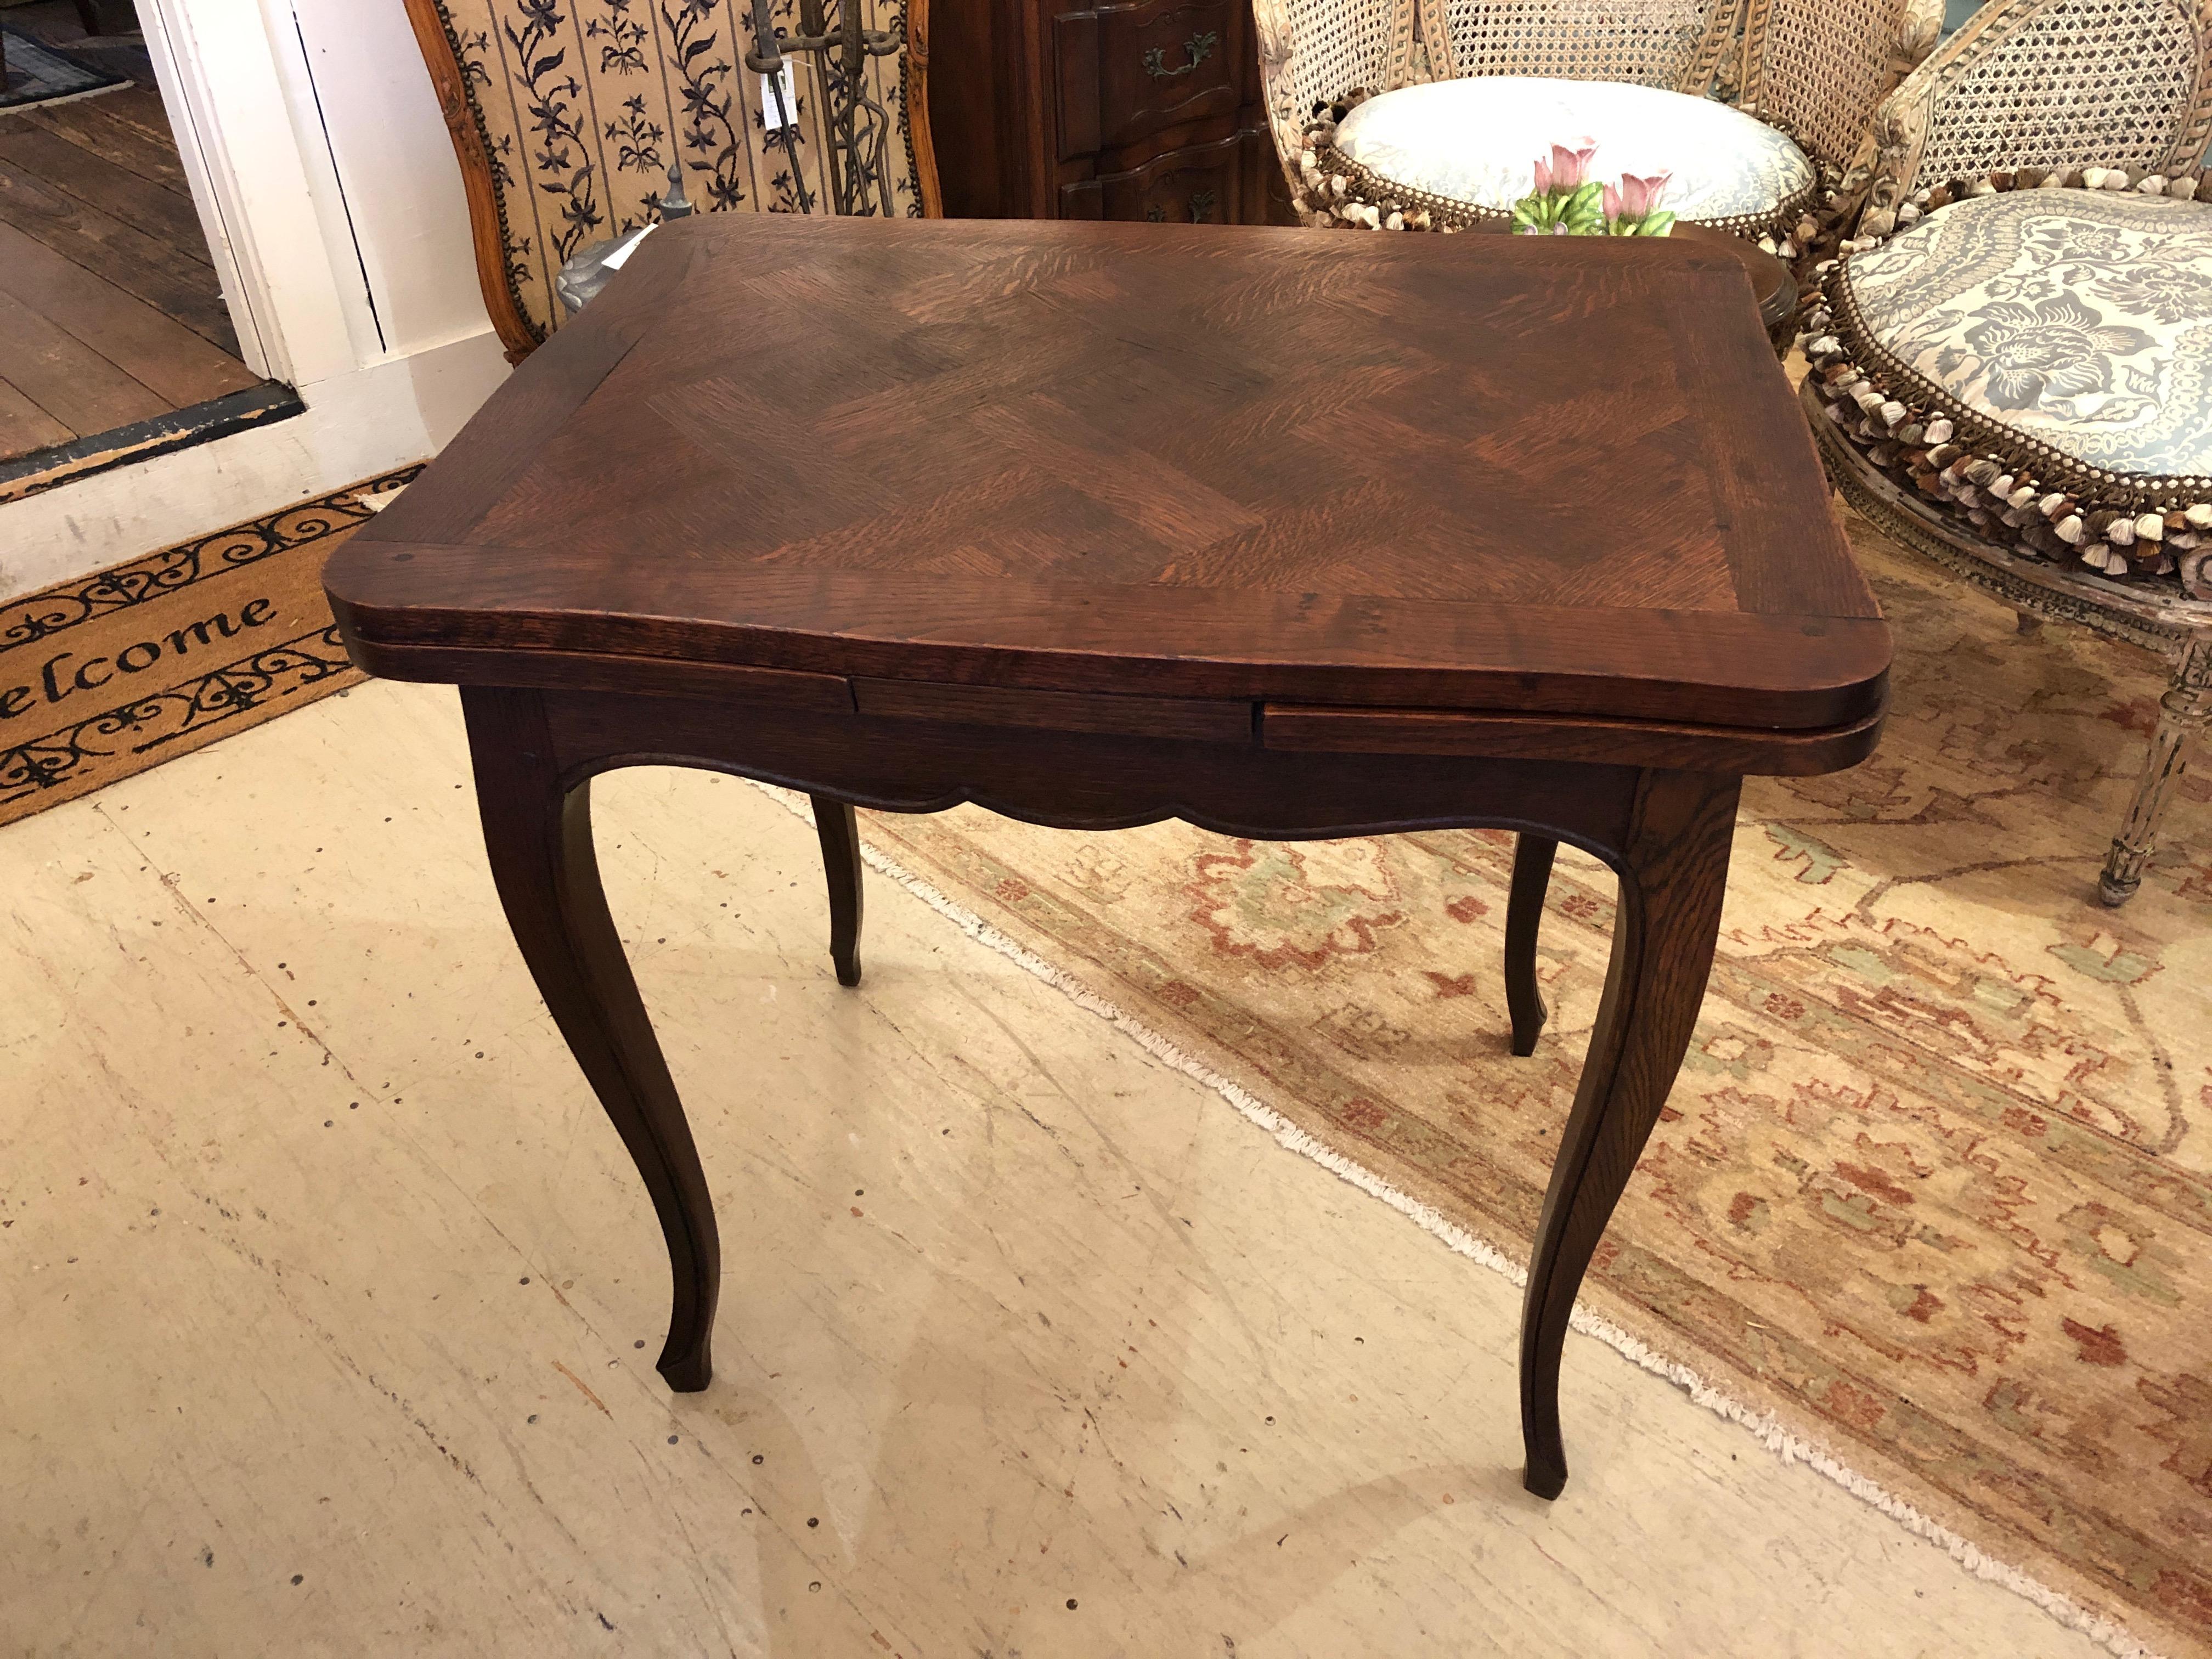 A remarkably versatile side table having beautiful walnut marquetry top and cabriole legs, that expands with two leaves at each end to become a functional dining table for a small space.
Closed measures: 31.25” W x 29” H x 23.5” D.